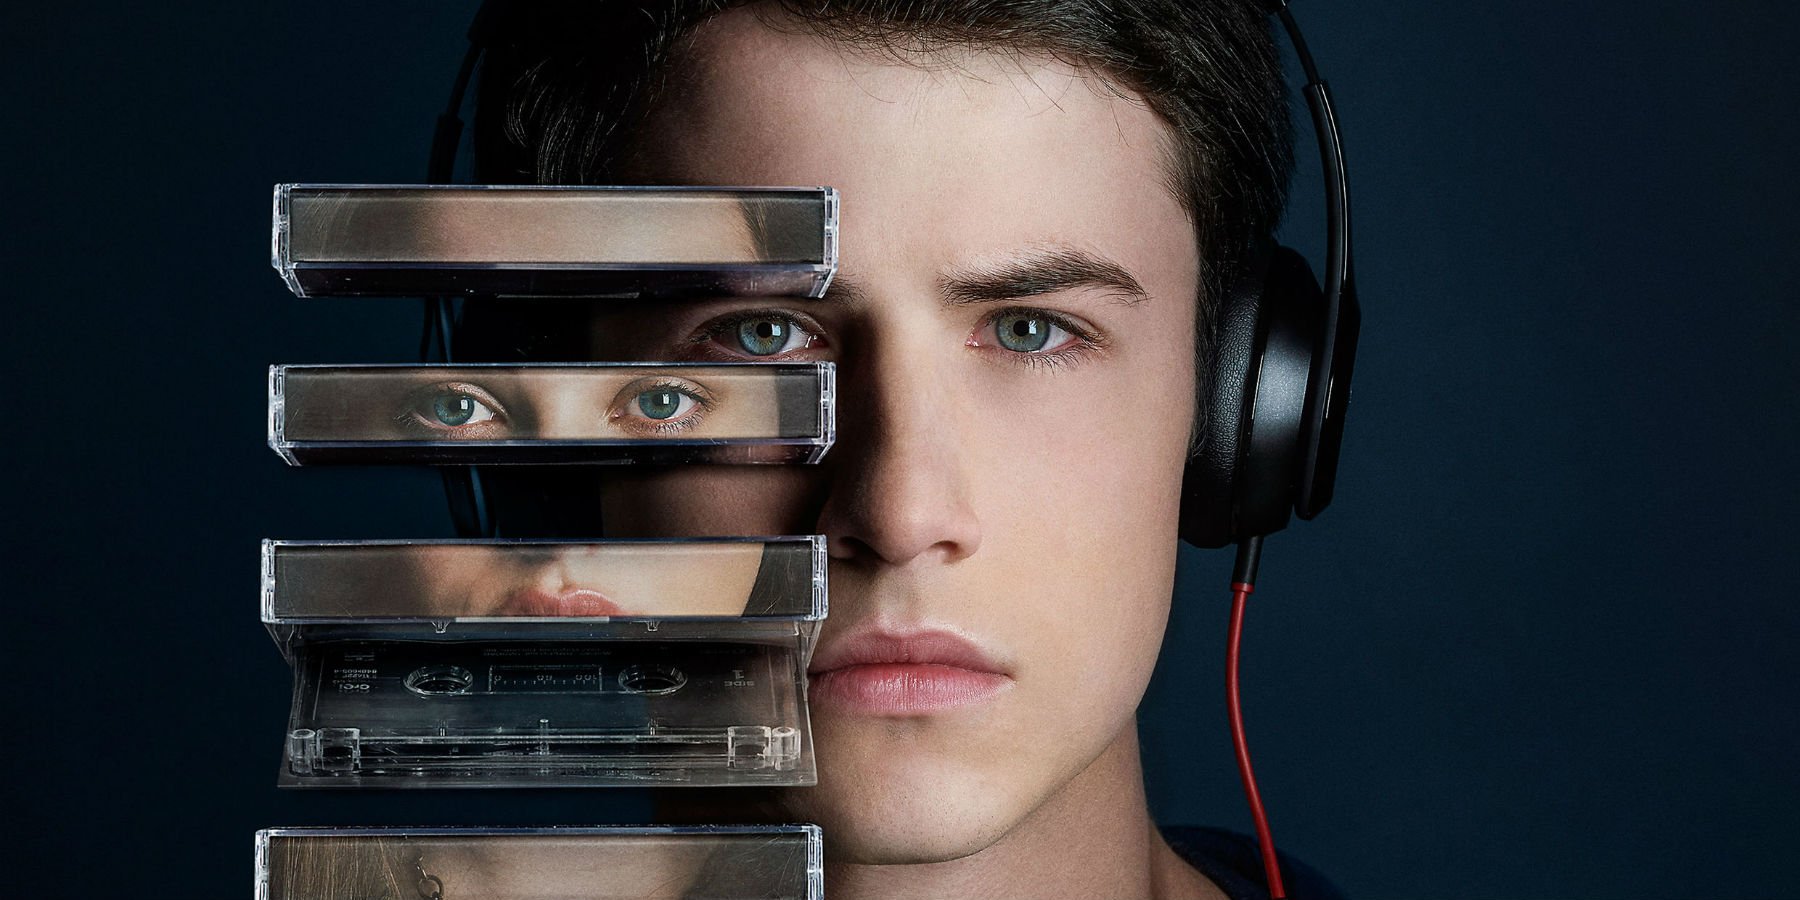 A close-up of Clay's face wearing headphones and listening to tapes in a promotional poster for 13 Reasons Why 